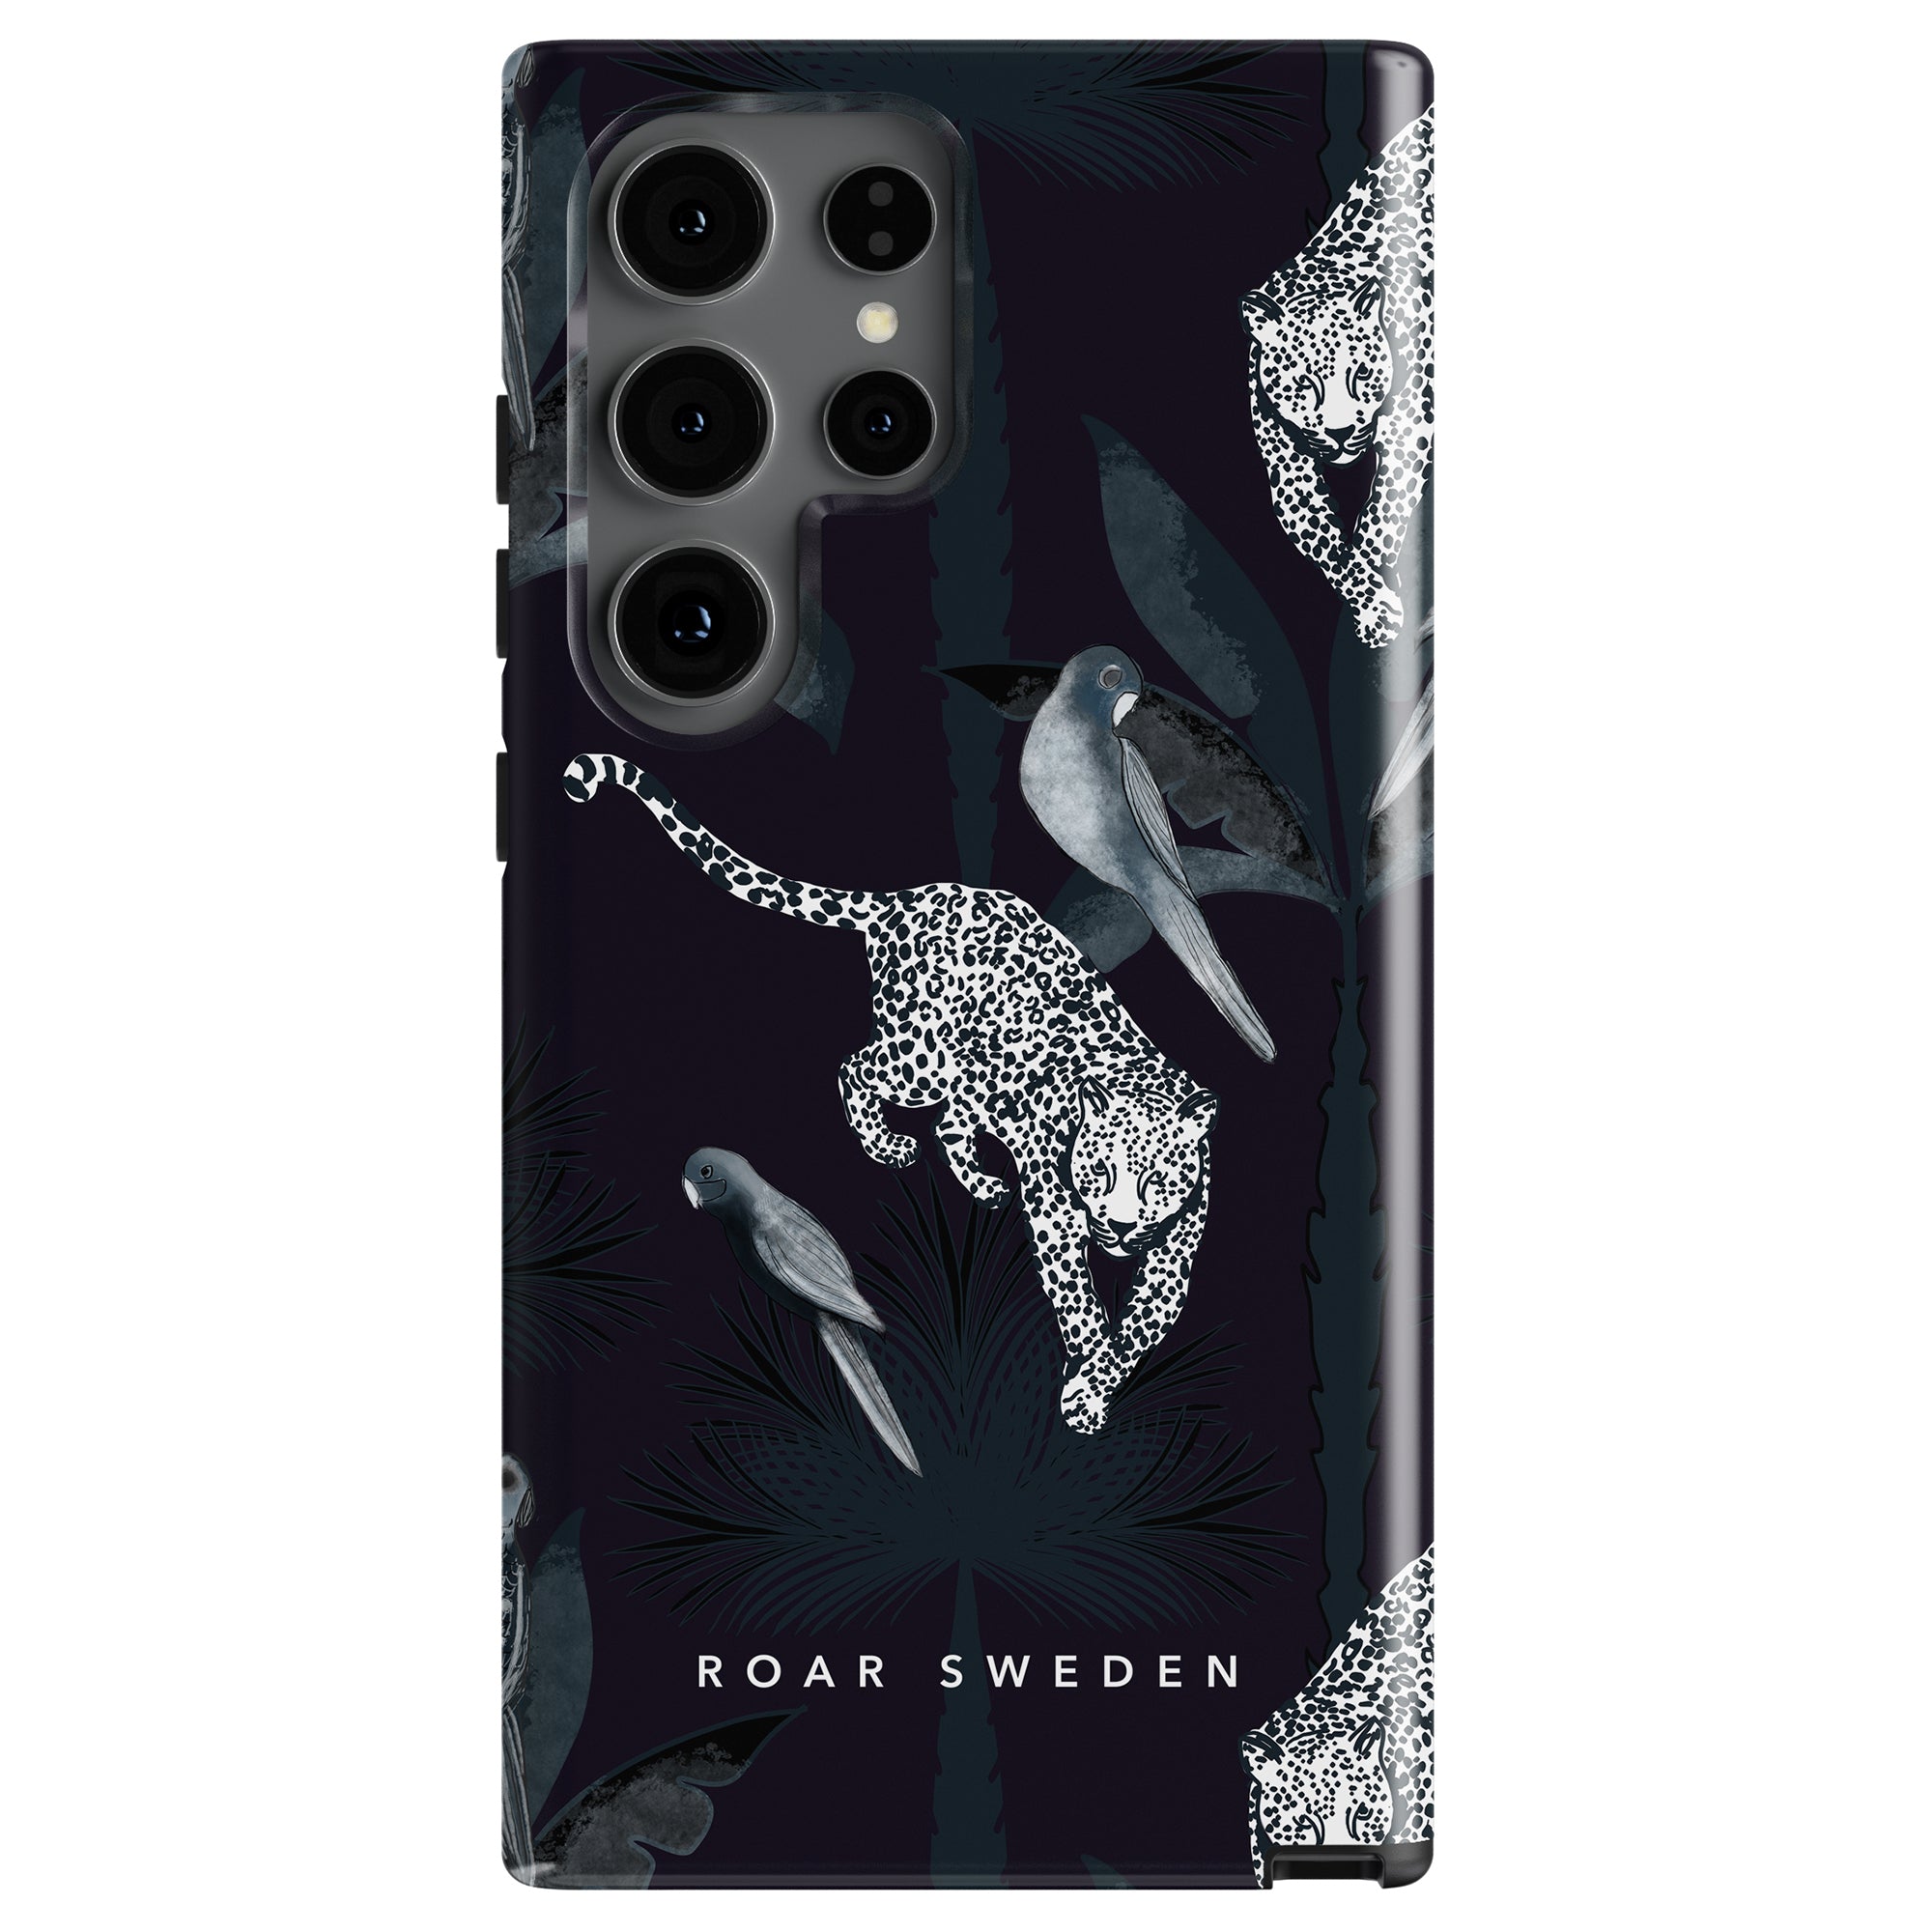 A Melas - Tough Case with a black case featuring a printed design of white leopards and birds among abstract foliage, plus the text "ROAR SWEDEN" at the bottom provides överlägset skydd.